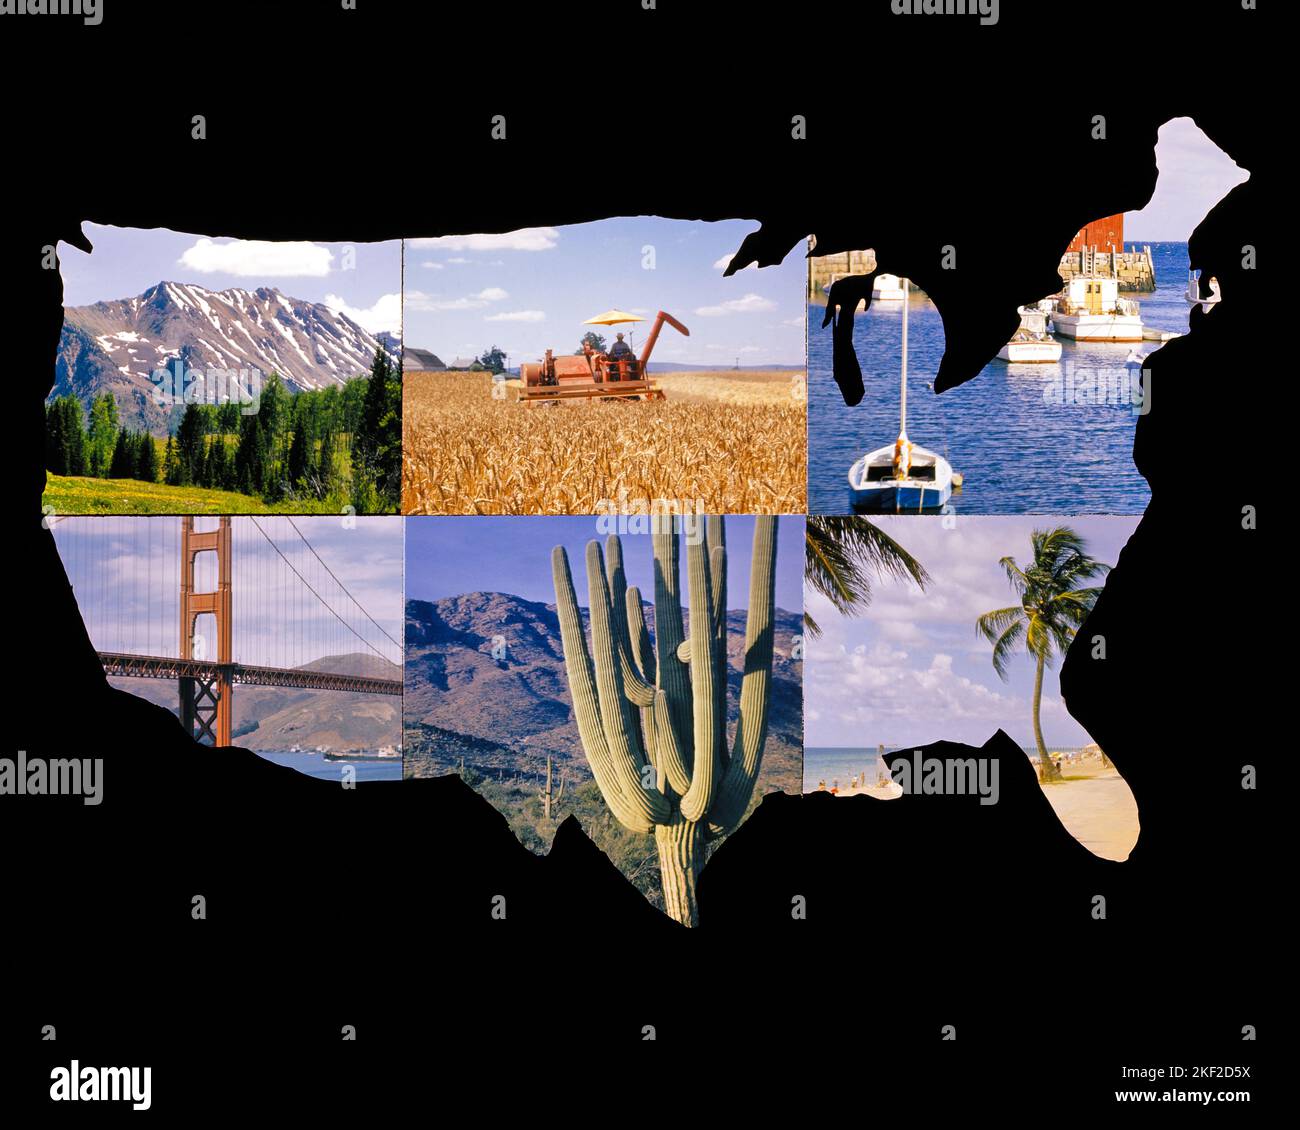 1960s MONTAGE OF CONTINENTAL UNITED STATES WITH REPRESENTATIVE REGIONAL IMAGES EAST COAST WEST COAST MIDWEST SOUTHERN - km1776 HAR001 HARS COMPOSITE POWERFUL PROGRESS CONTINENTAL OPPORTUNITY SOUTHERN CONNECTION NORTHWESTERN CONCEPTUAL ESCAPE SOUTHEASTERN GULF COAST REPRESENTATIVE AMERICA THE BEAUTIFUL GROWTH IDEAS LINK NEW ENGLAND ROCKY MOUNTAINS SPAN TOGETHERNESS BRIDGES GOLDEN GATE HAR001 JOIN MIDWEST OLD FASHIONED REGIONAL SOUTHWESTERN Stock Photo